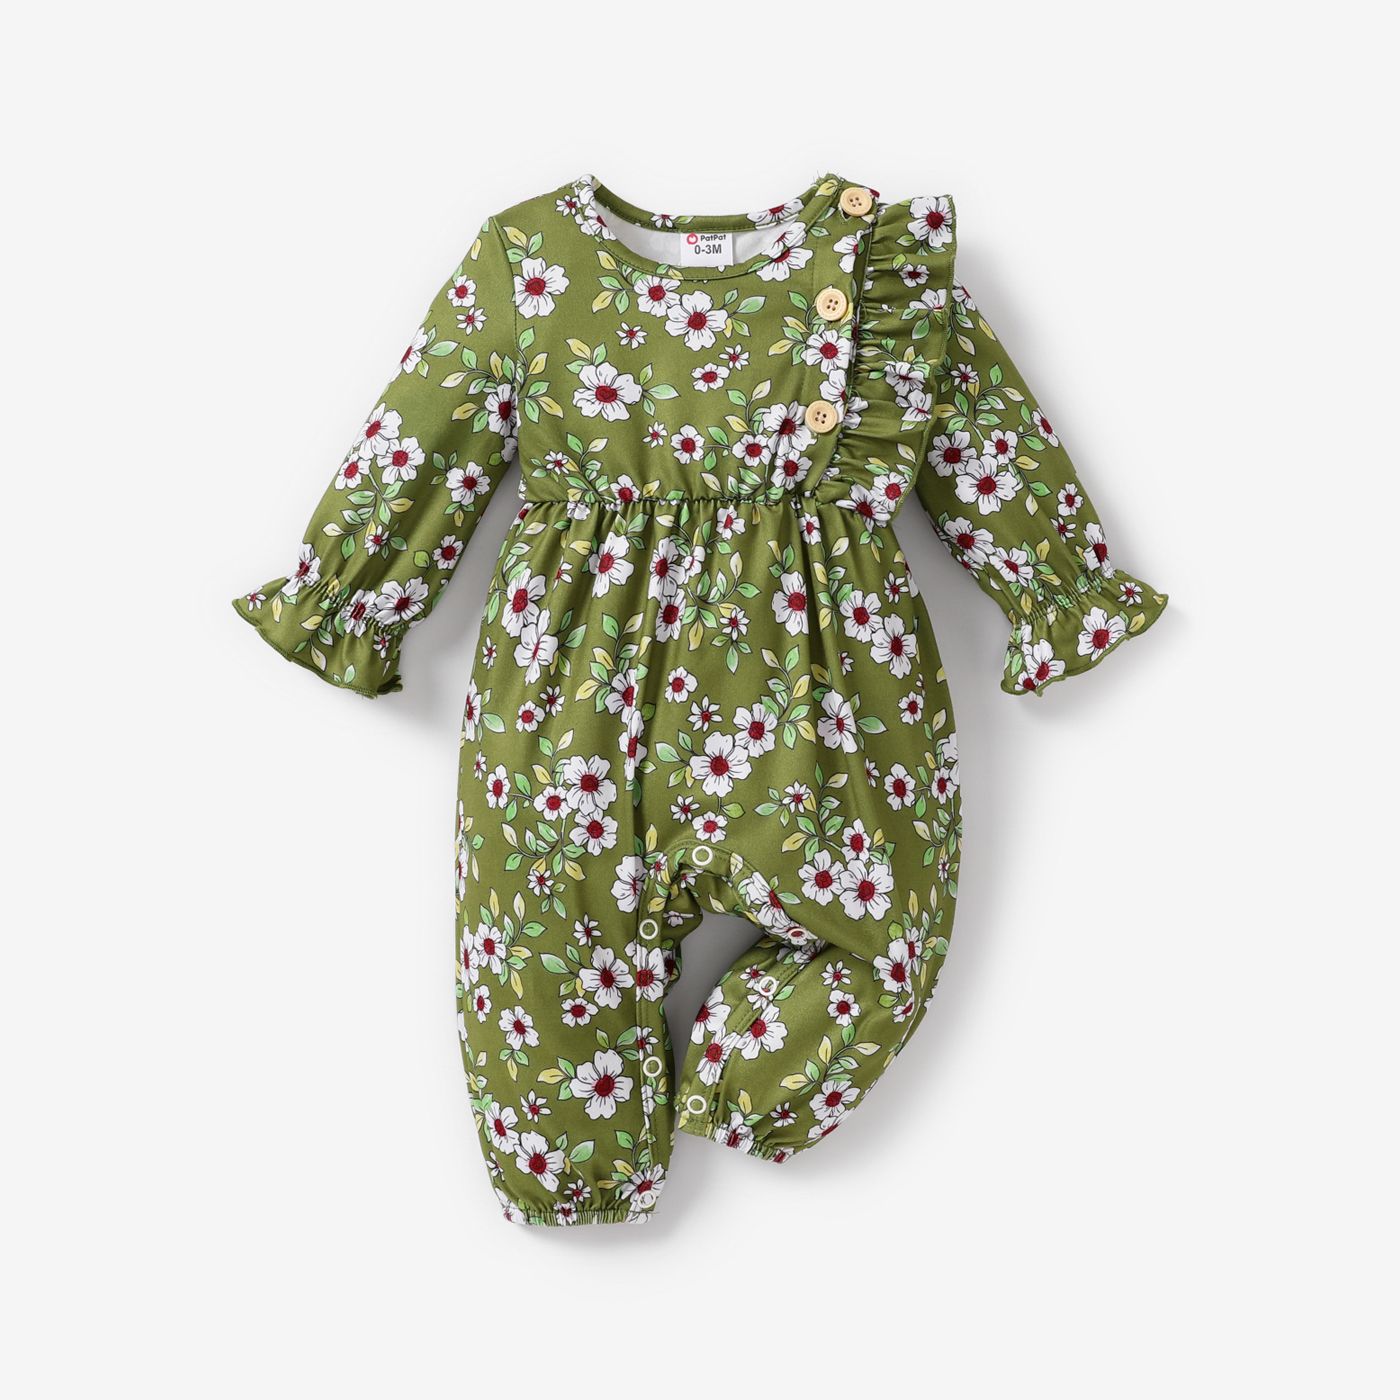 BABY GIRL Sweet Butterfly/Solid Color/Floral Print Jumpsuit, Soft Ruffle Edge, 1 Piece, Medium Thickness, Polyester Spandex